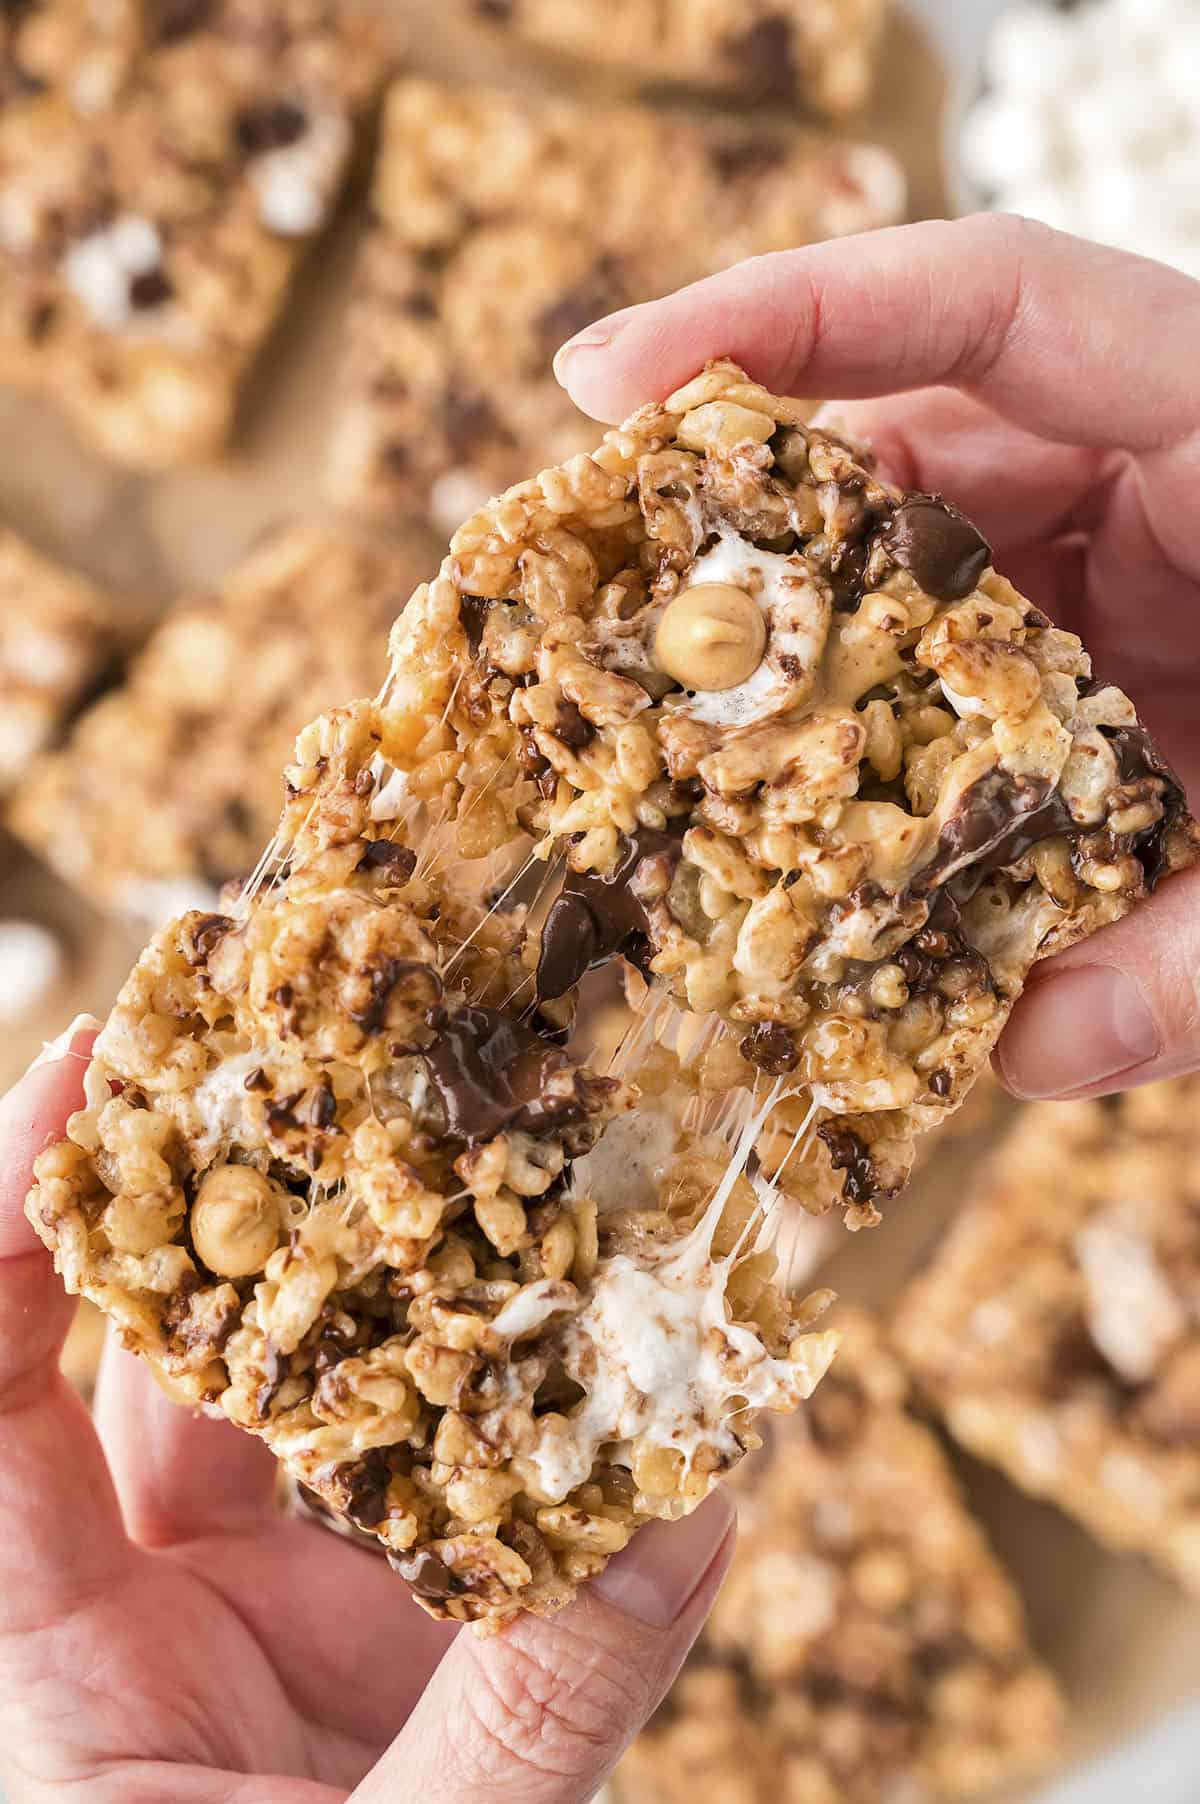 Hand pulling apart of a chocolate peanut butter rice krispie treat.